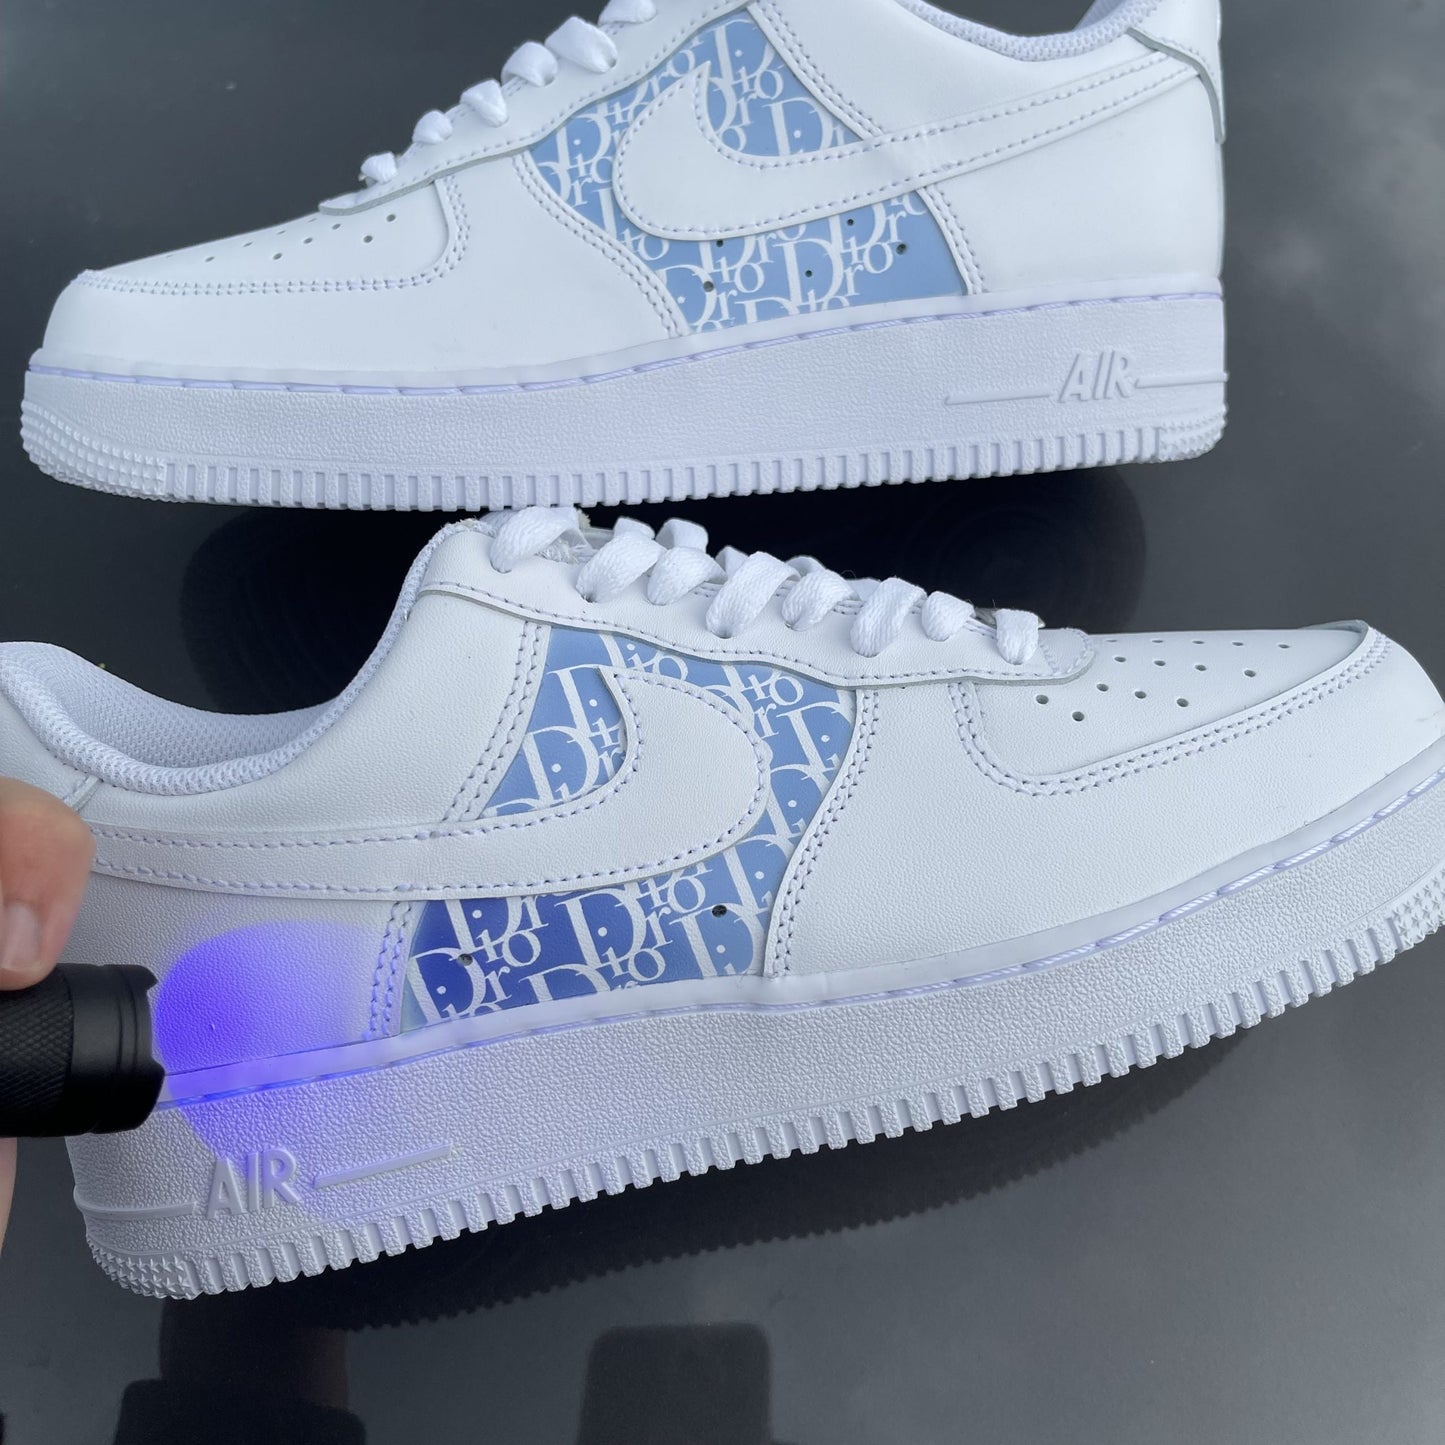 Custom AIR FORCE 1 - Christian D (UV color changing)